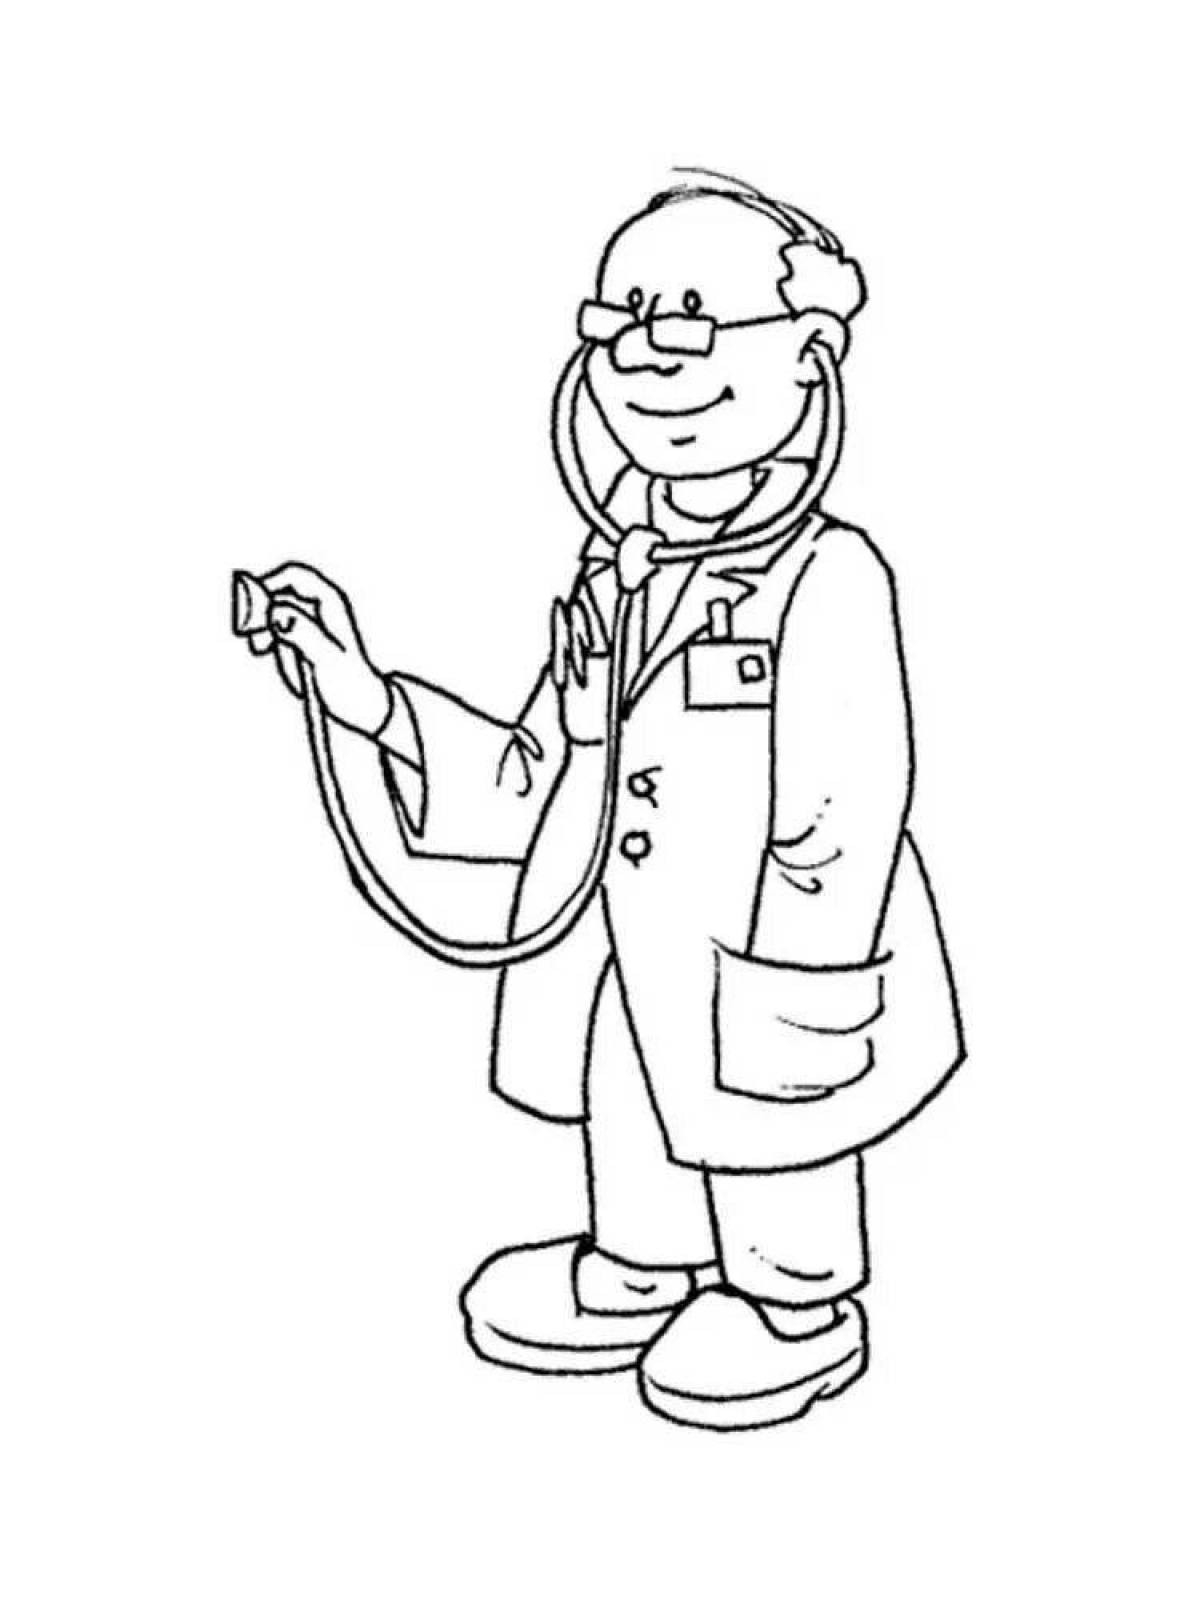 The Glorious Profession of a Doctor coloring page